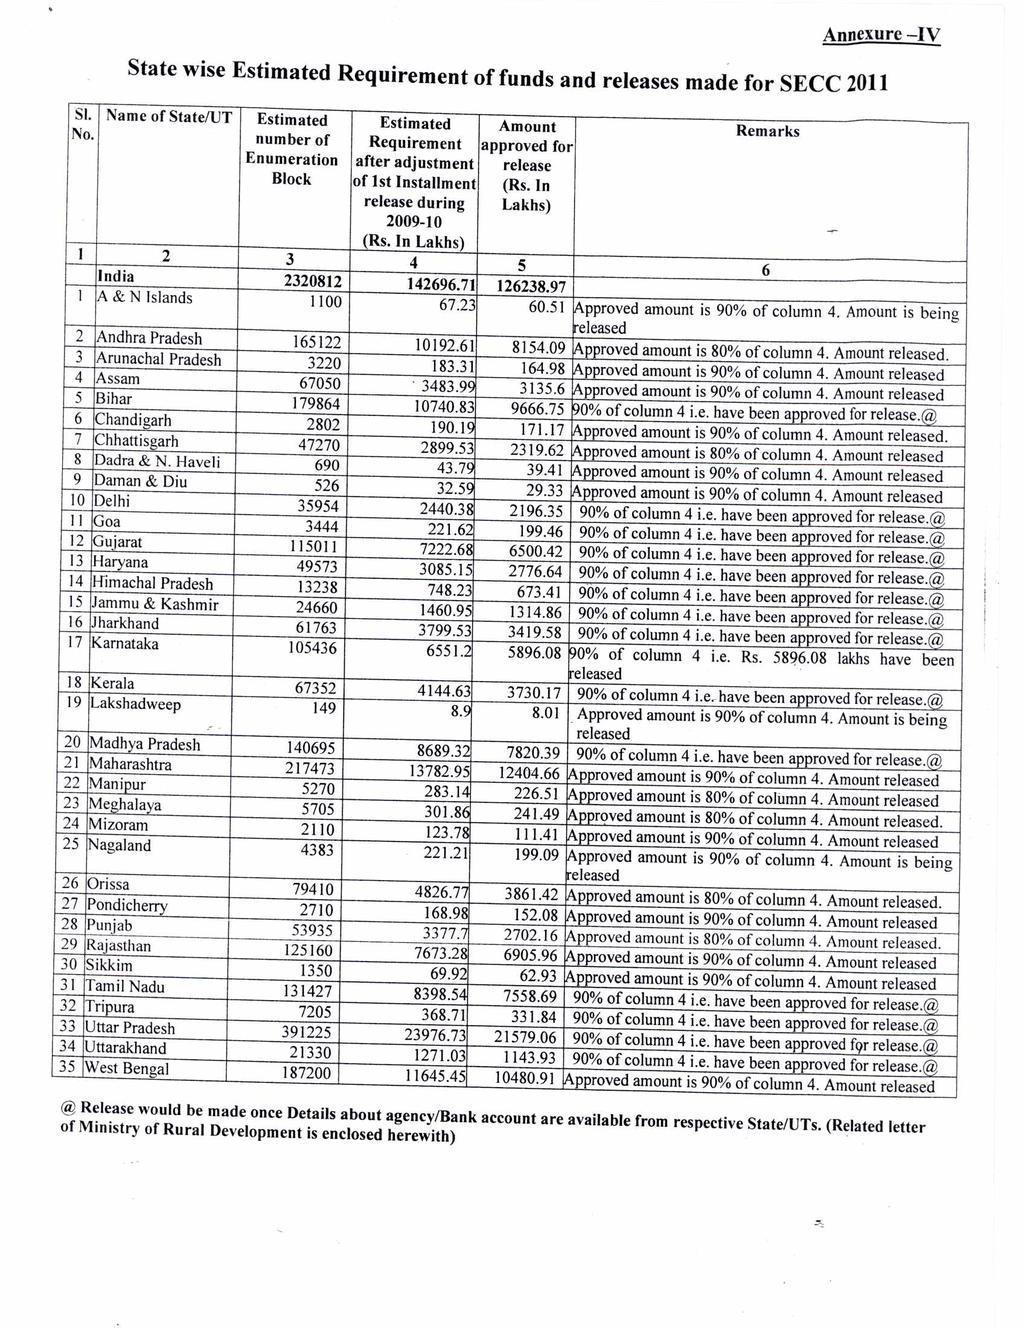 Annexure -IV State wise Requirement of funds and releases made for SECC 2011 SI. Name of State/UT 4 5 6 Arunachal Pradesh Chandigarh 11111220133111111 8 Dadra & N.